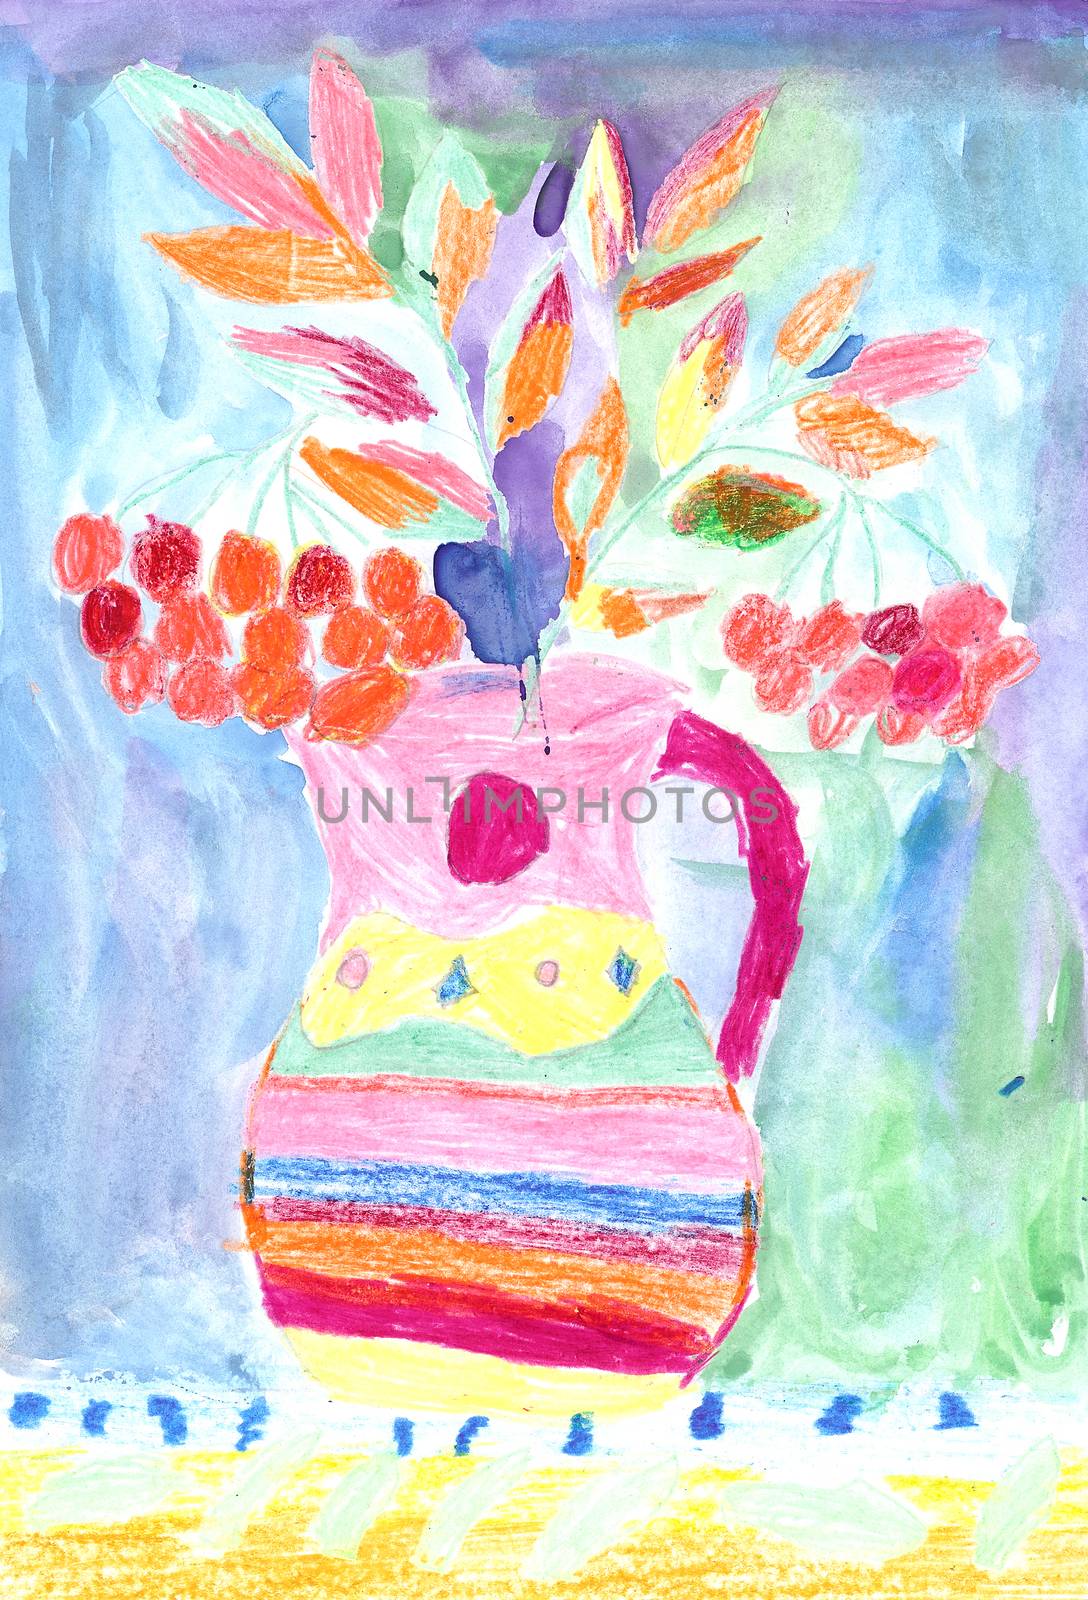 Child's drawing of a colorful bouquet